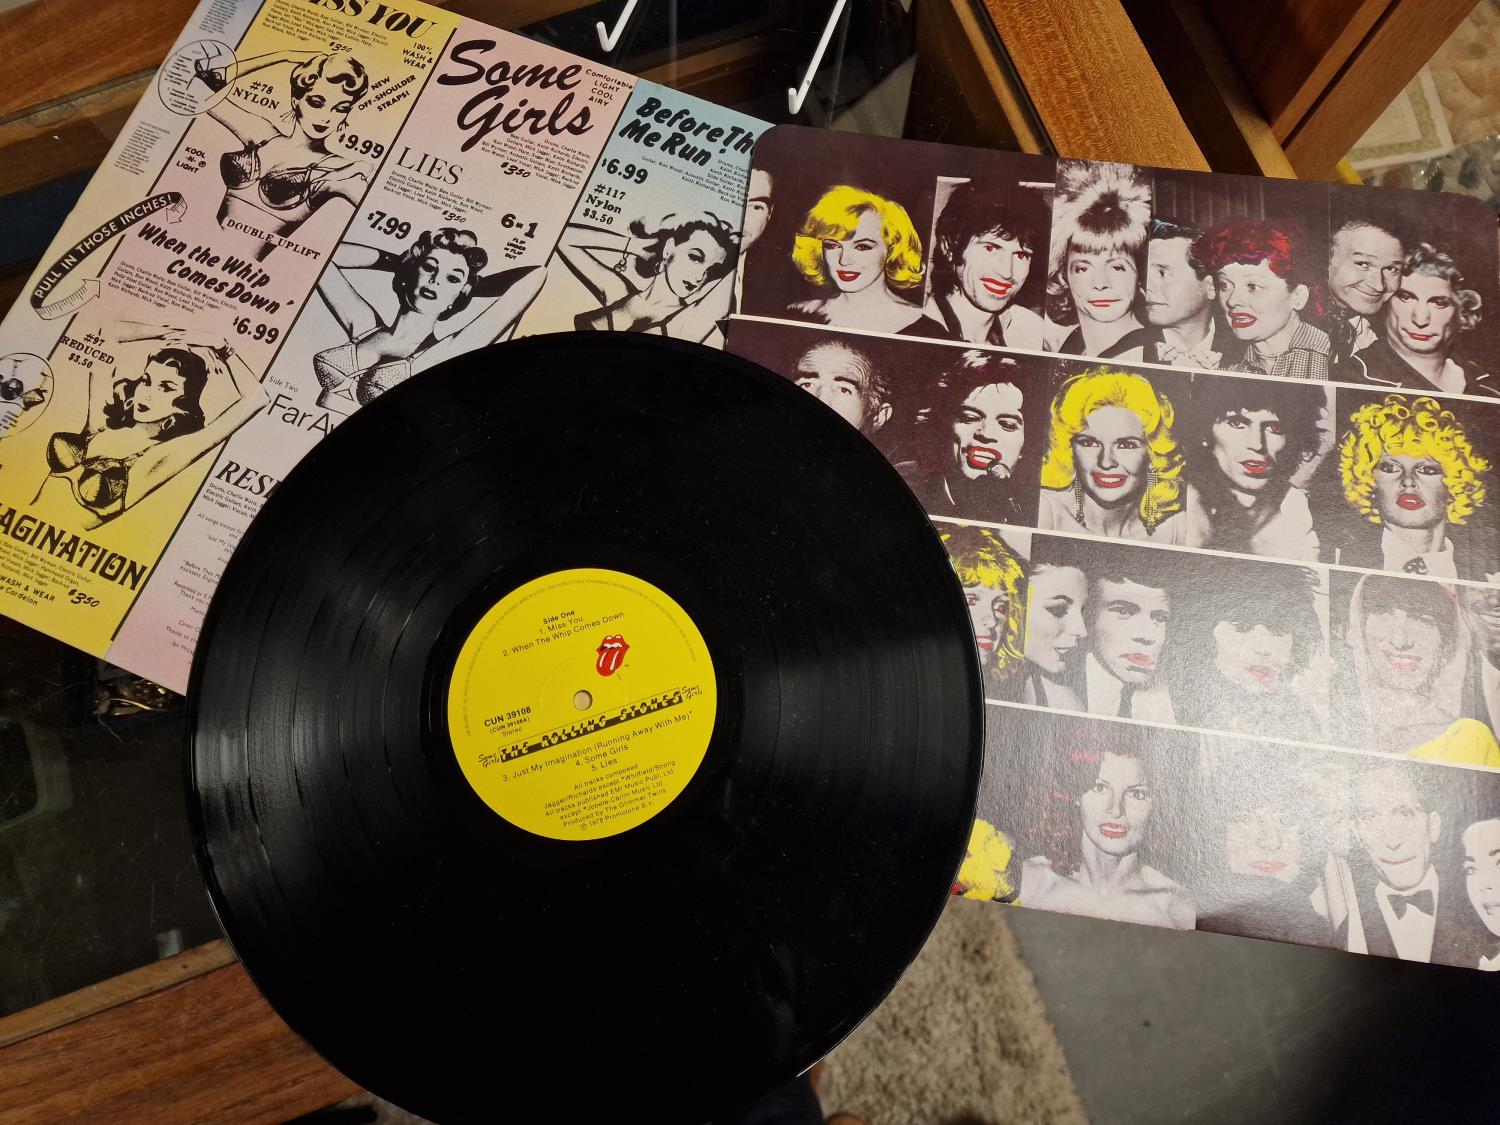 Pair of Original Vinyl Pressings of Rolling Stones' Some Girls & Its Only Rock'n'Roll LP Records - b - Image 4 of 5